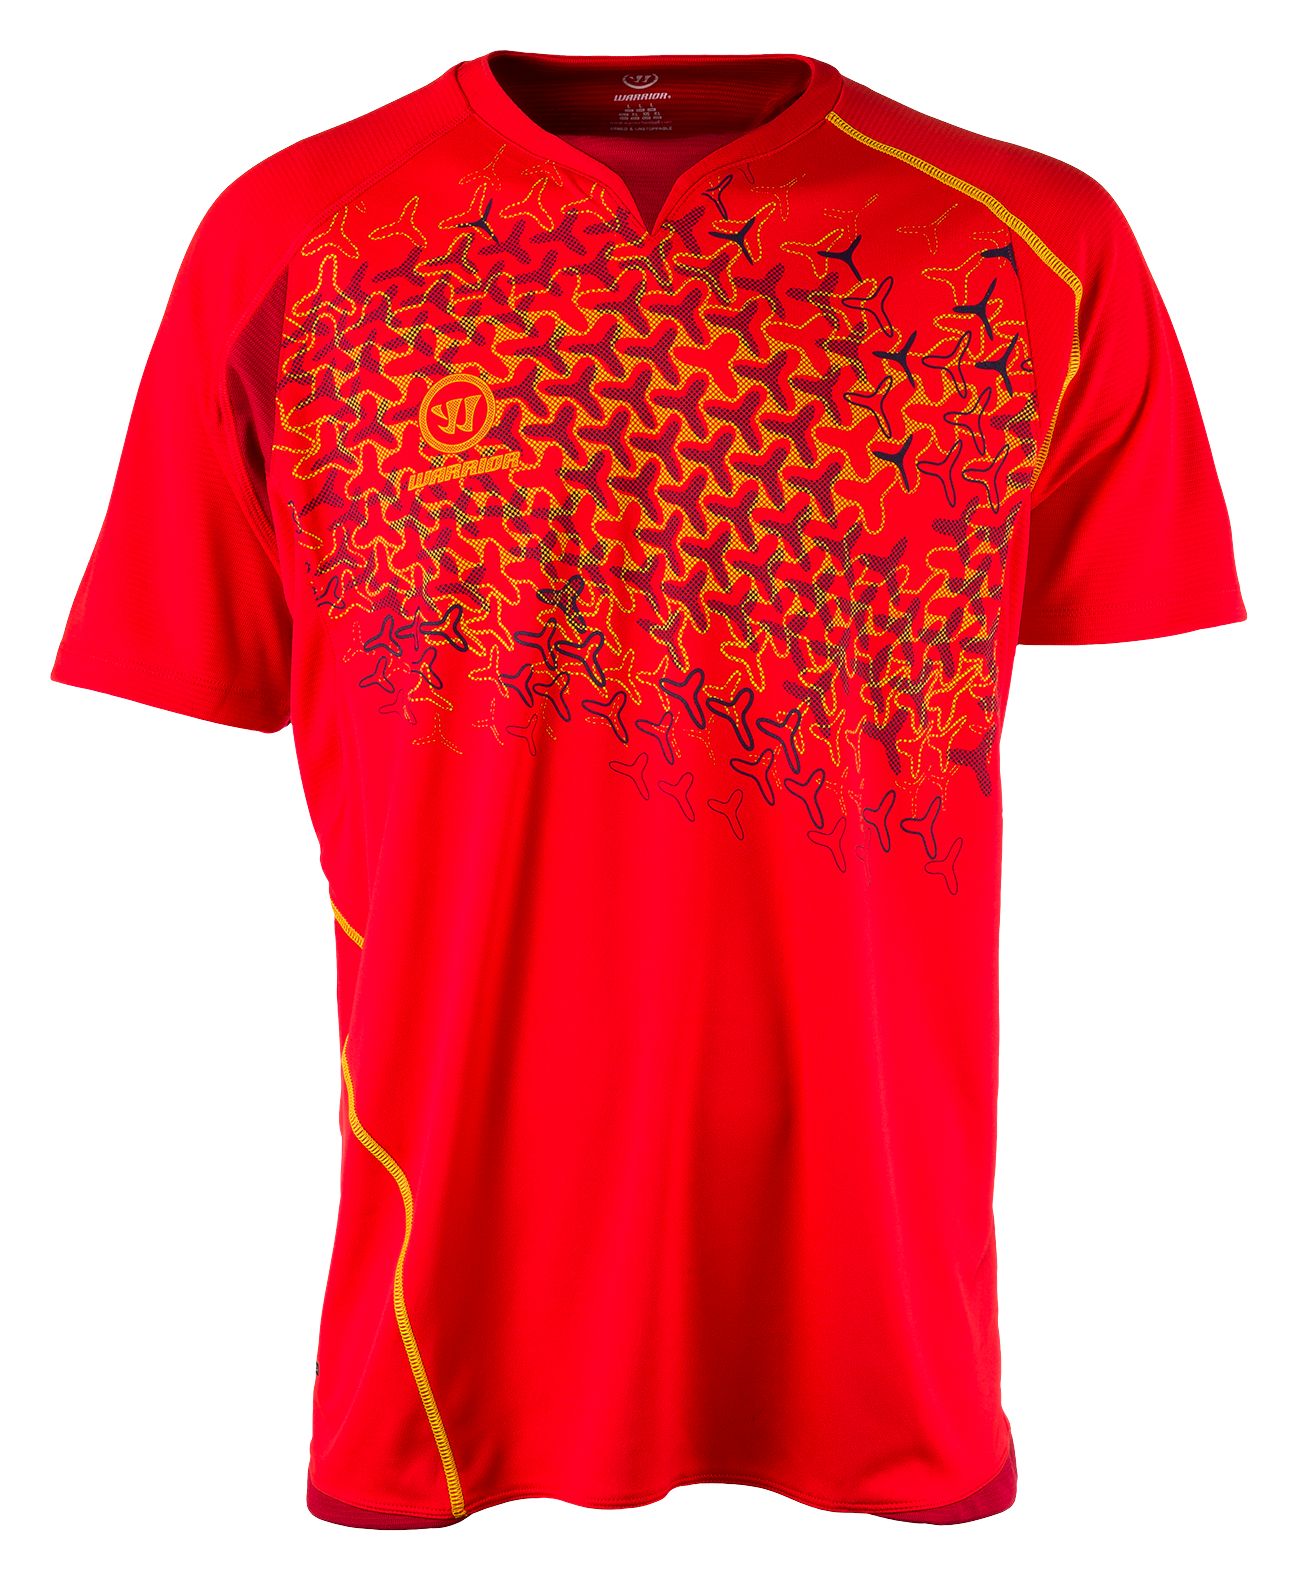 Superheat Training SS Jersey, Fiery Red image number 0